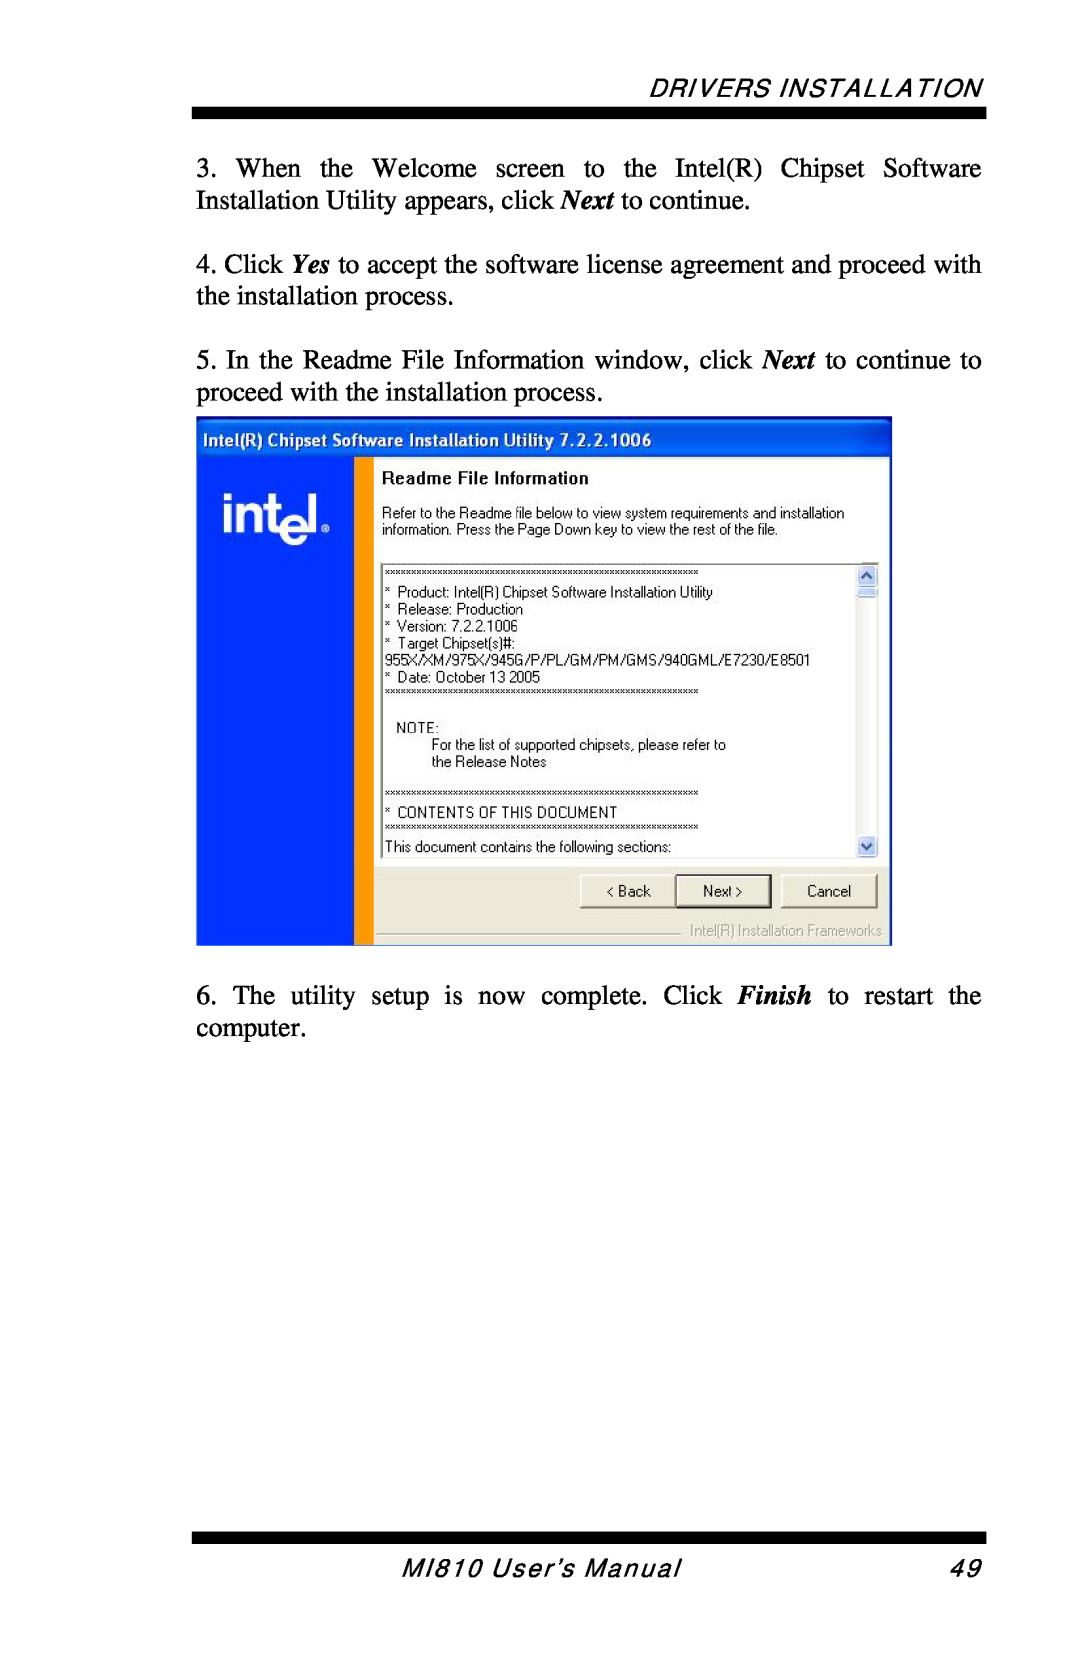 Intel MI810 When the Welcome screen to the IntelR Chipset Software Installation Utility appears, click Next to continue 